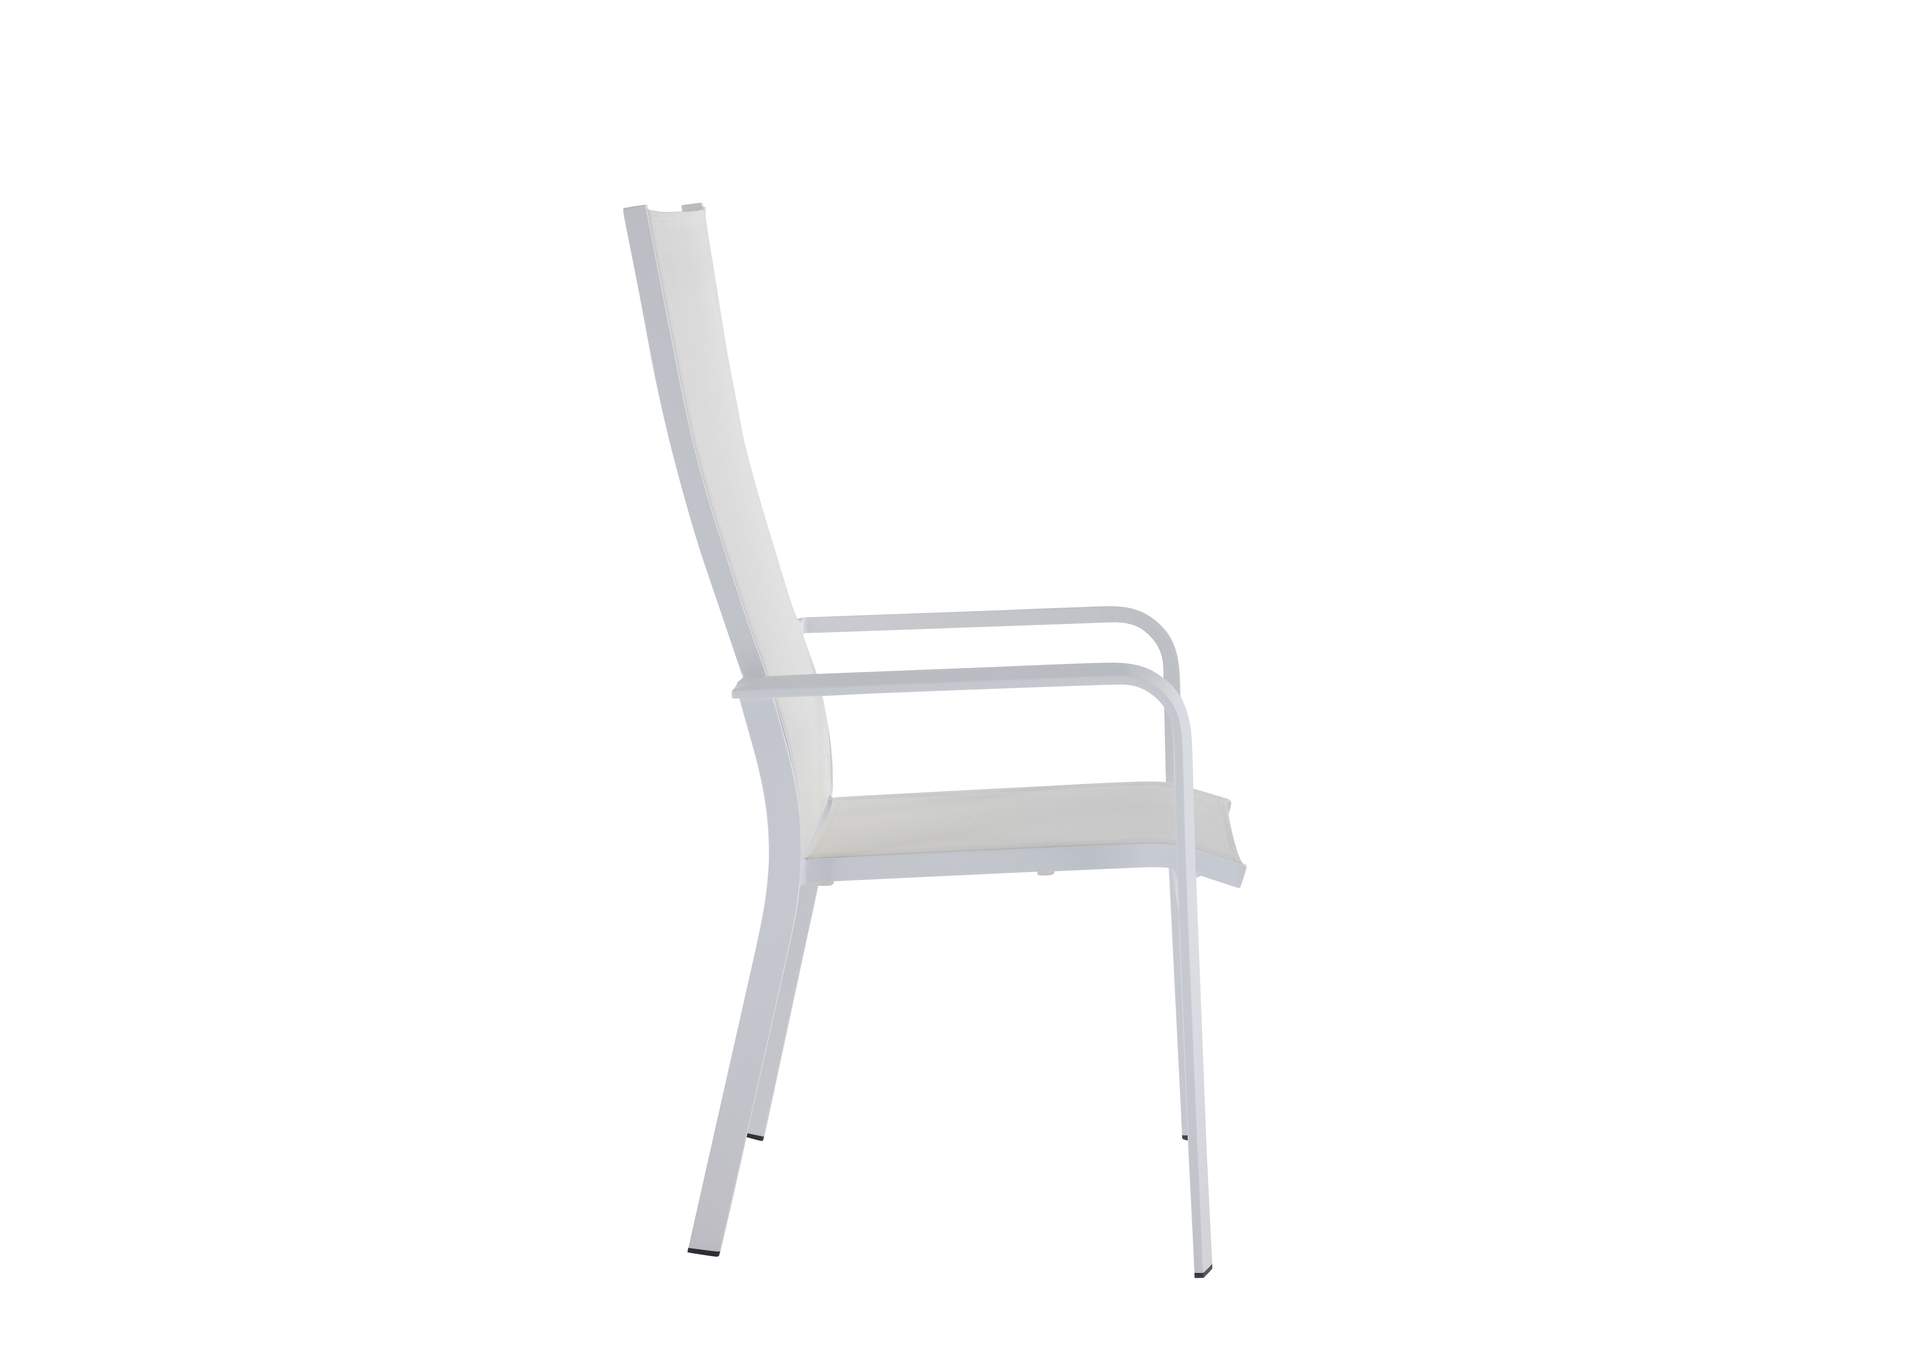 Contemporary High Back Outdoor Chair with Sling Seat,Chintaly Imports